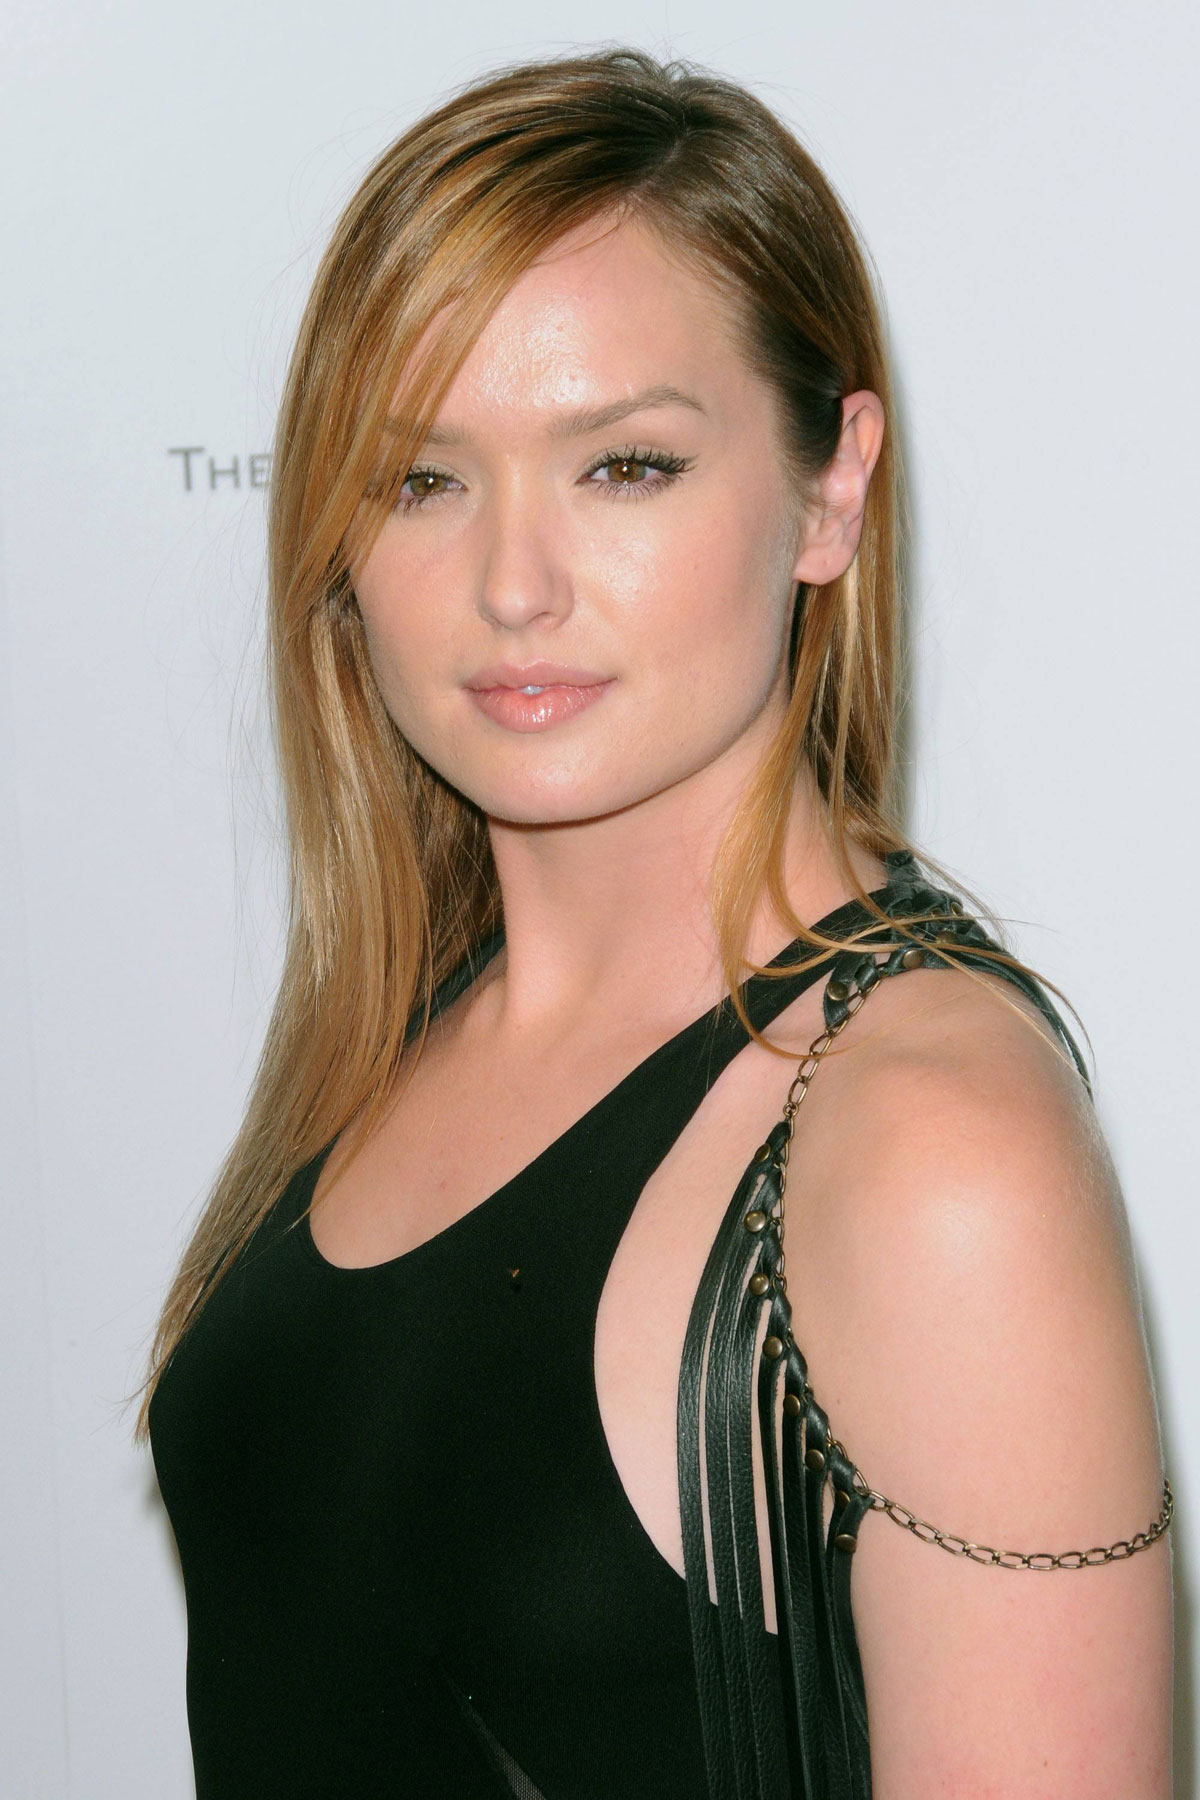 KAYLEE DeFER at The Master Screening in New York HawtCelebs